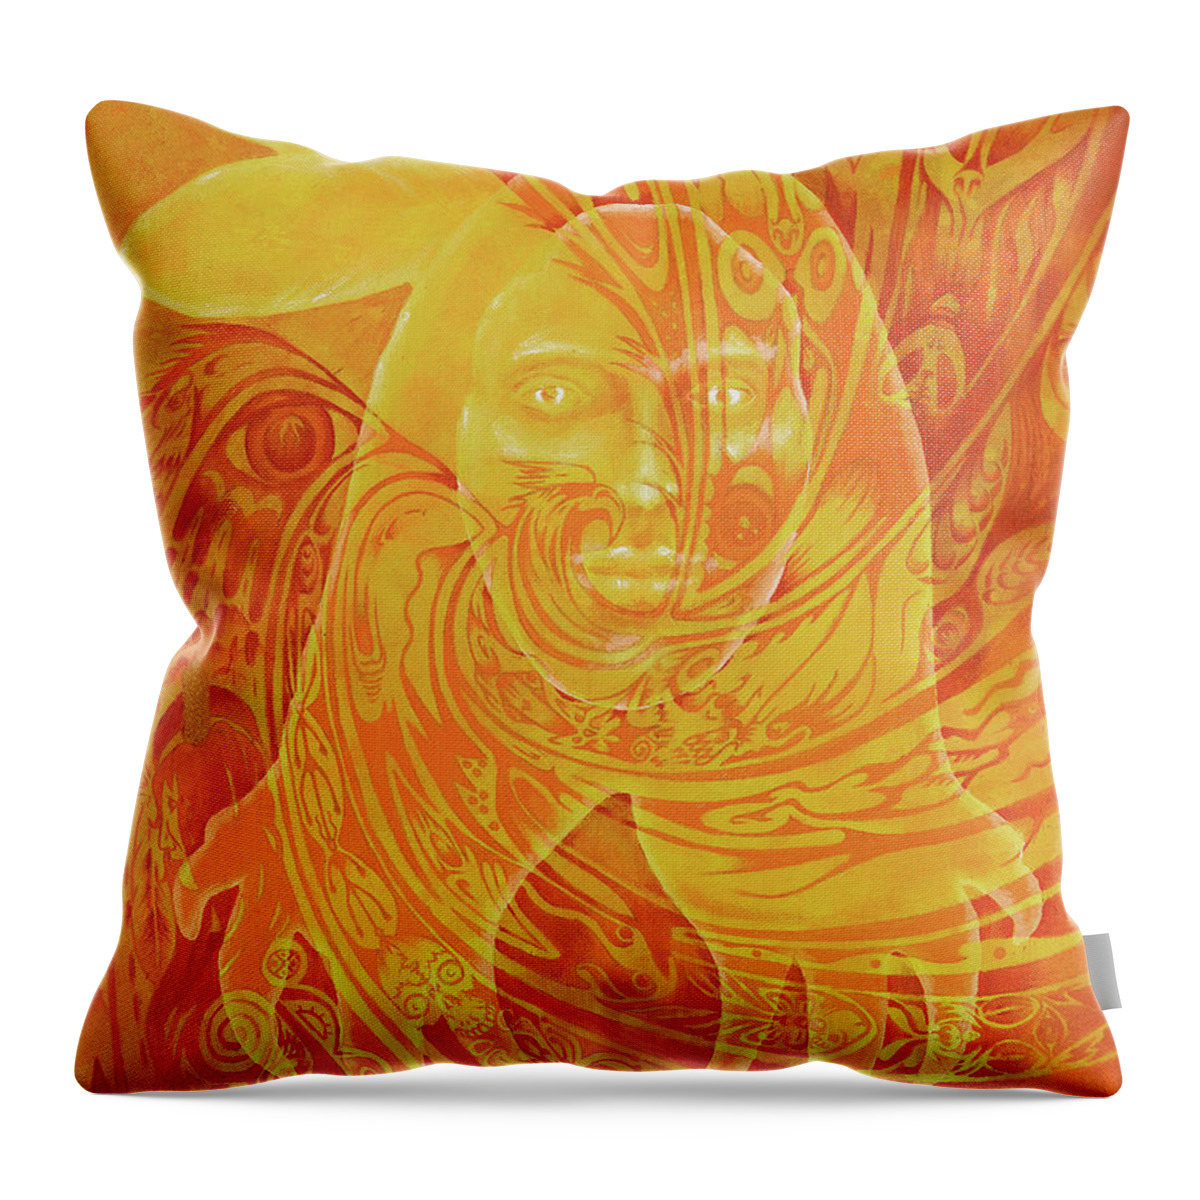 Native American Throw Pillow featuring the painting Spirit Fire by Kevin Chasing Wolf Hutchins